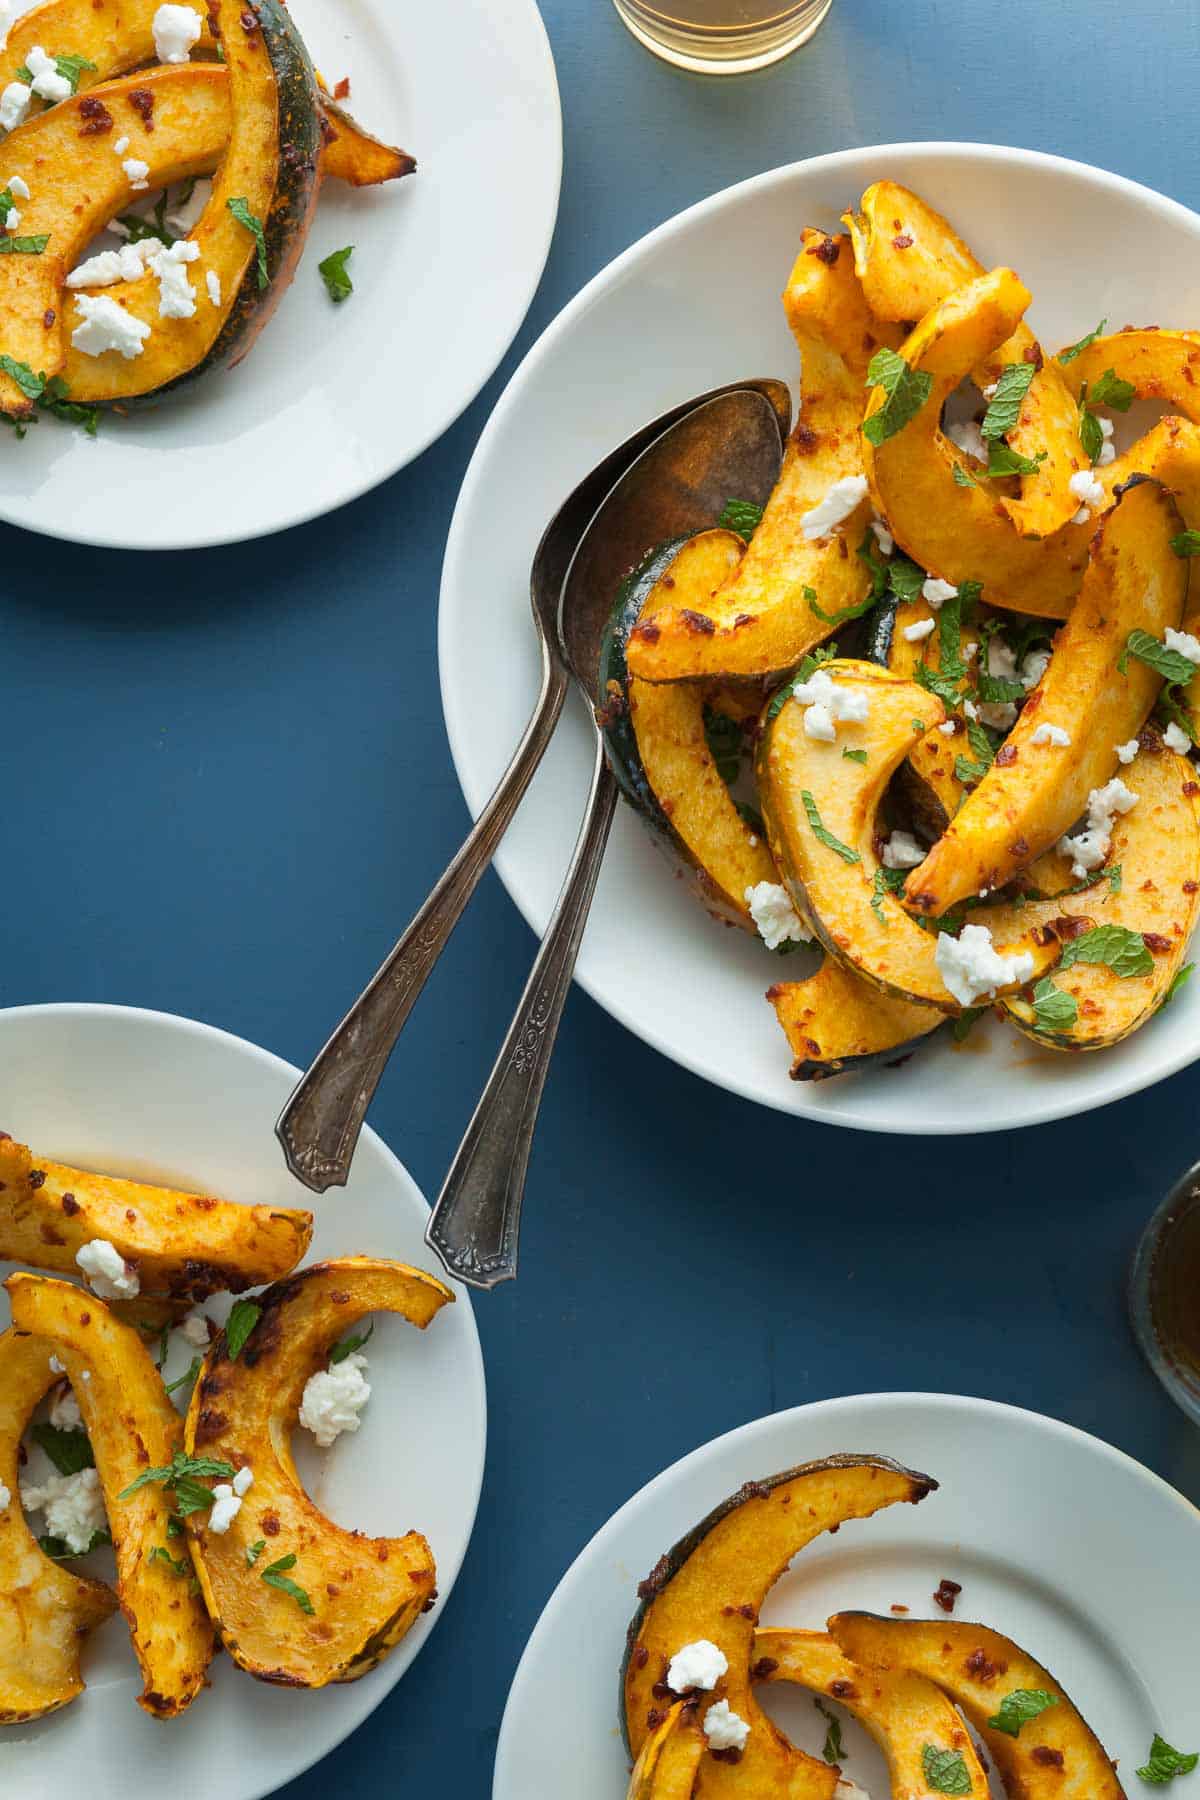 Roasted Winter Squash in Serving Bowls